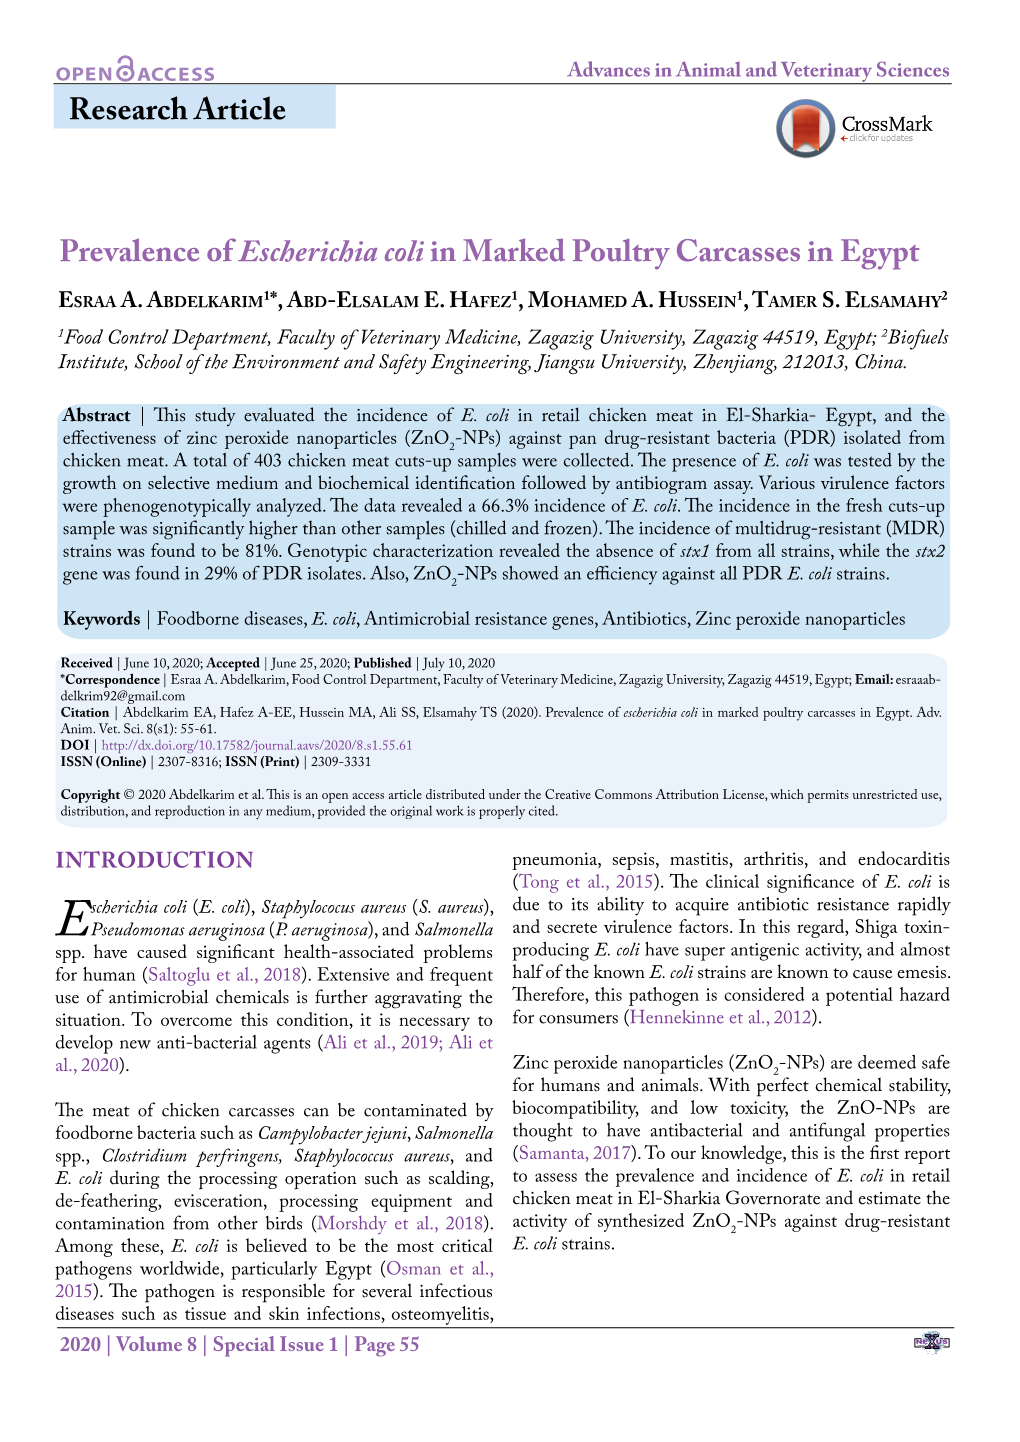 Escherichia Coli in Marked Poultry Carcasses in Egypt